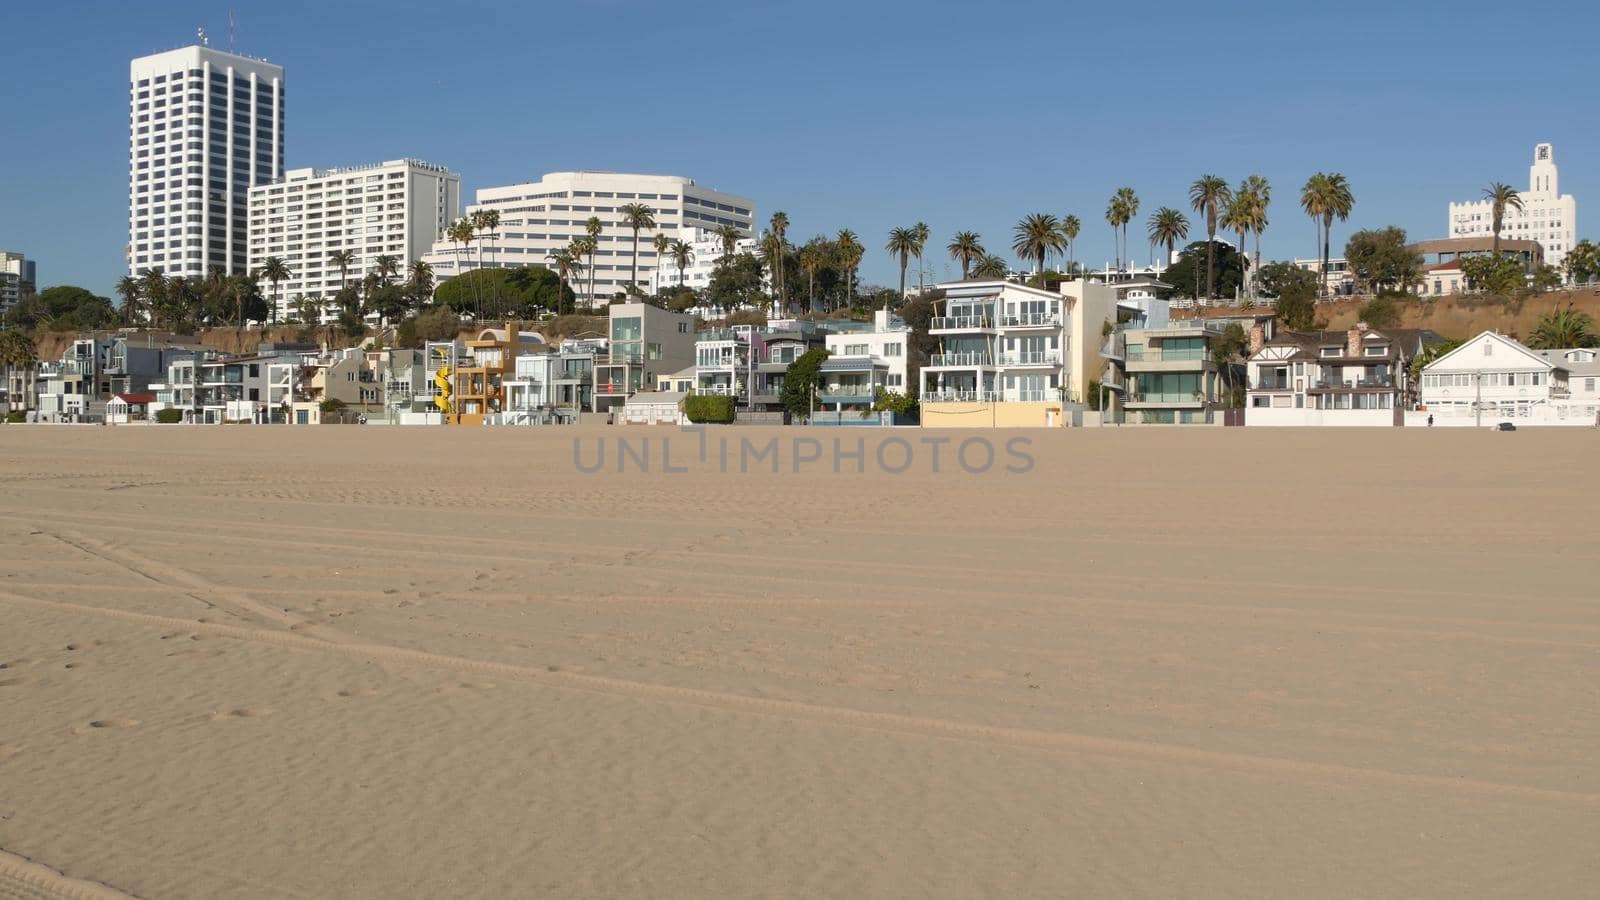 California summertime beach aesthetic, sunny blue sky, sand and many different beachfront weekend houses. Seafront buildings, real estate in Santa Monica pacific ocean resort near Los Angeles CA USA by DogoraSun